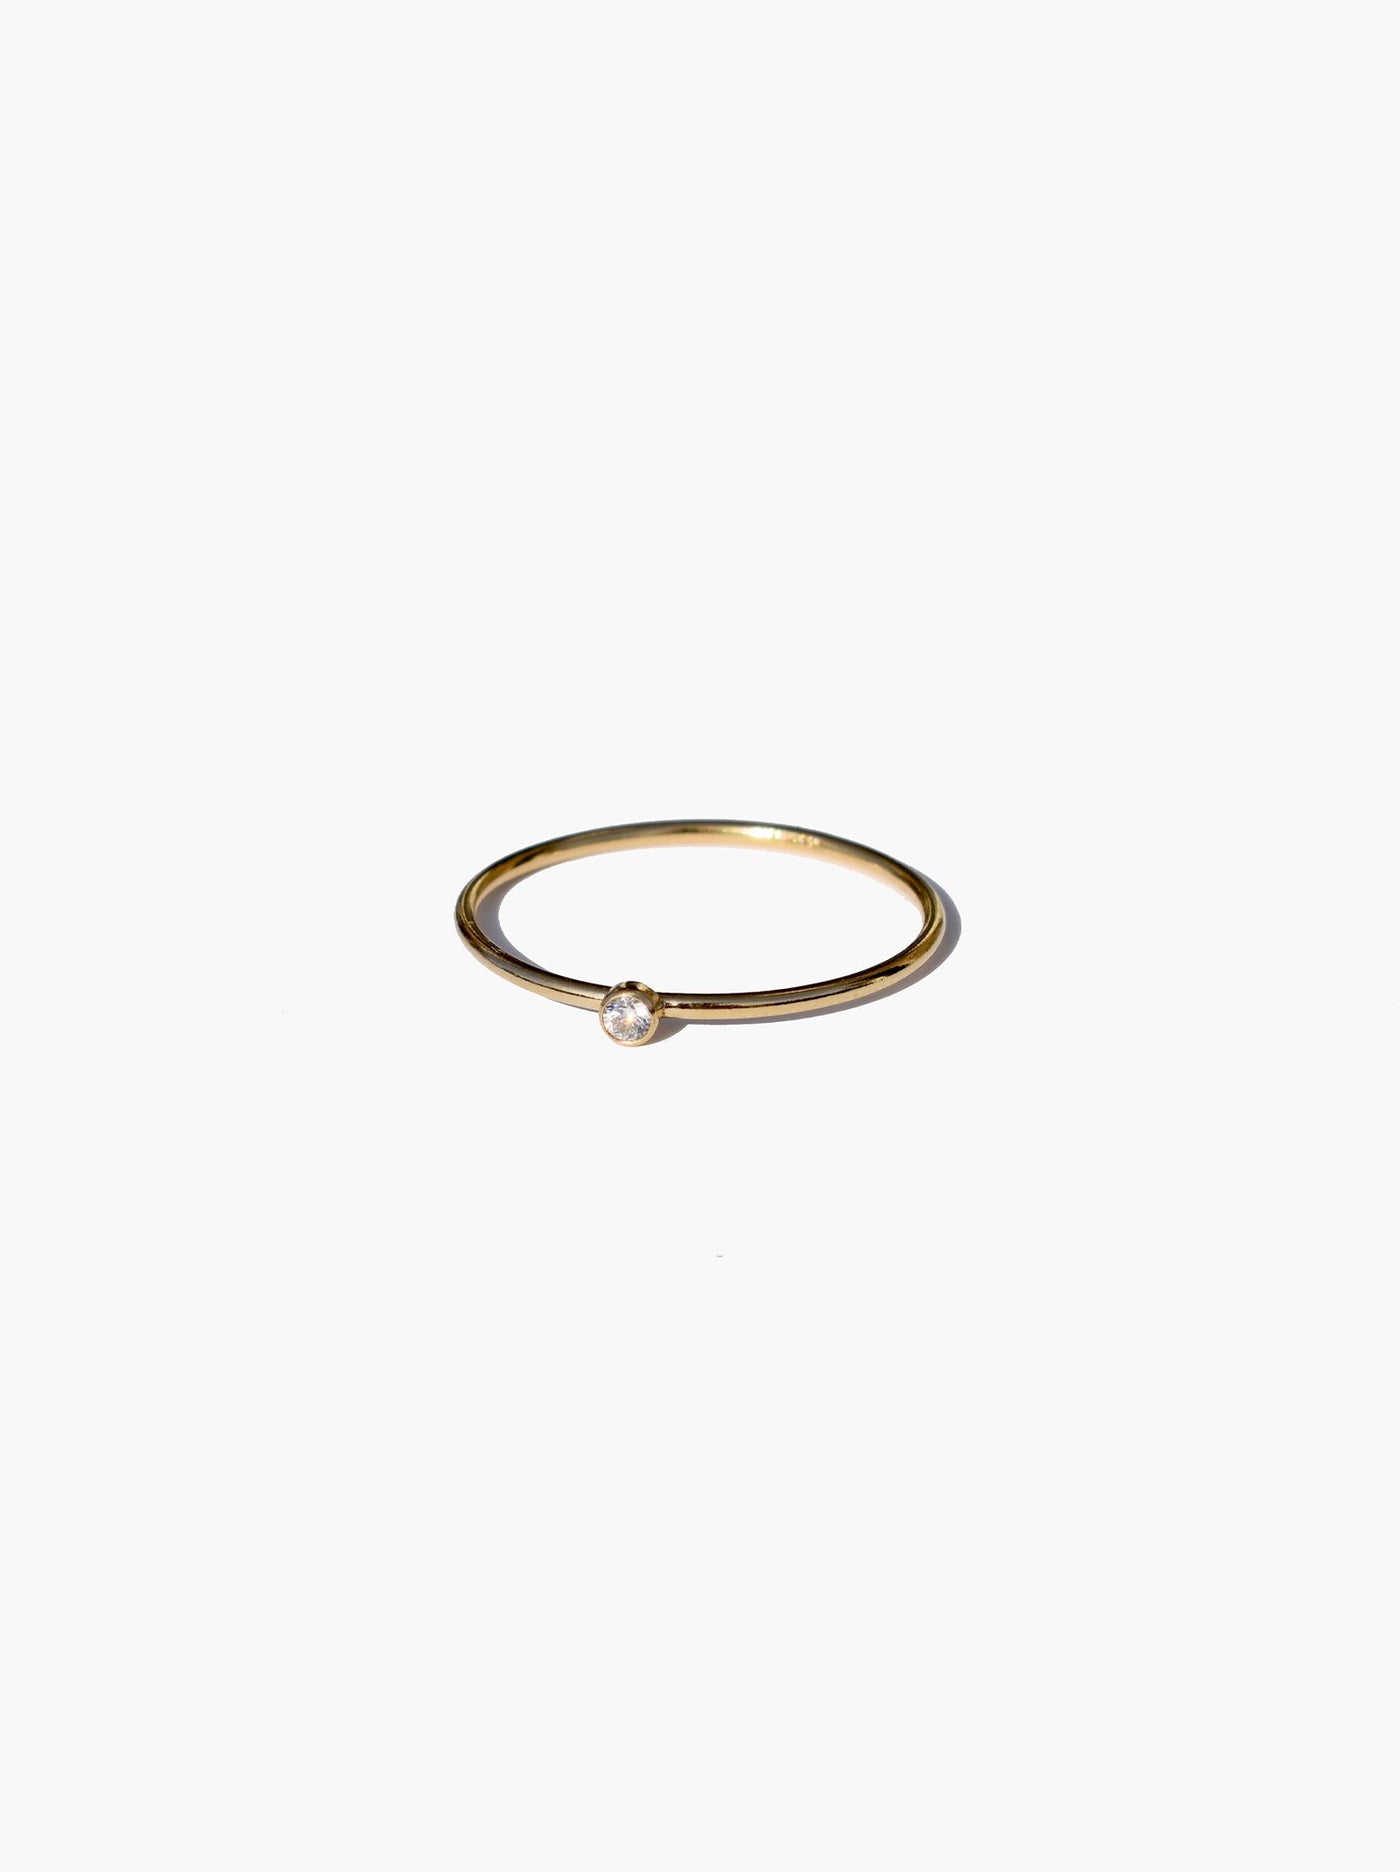 Able Luz Petite Ring